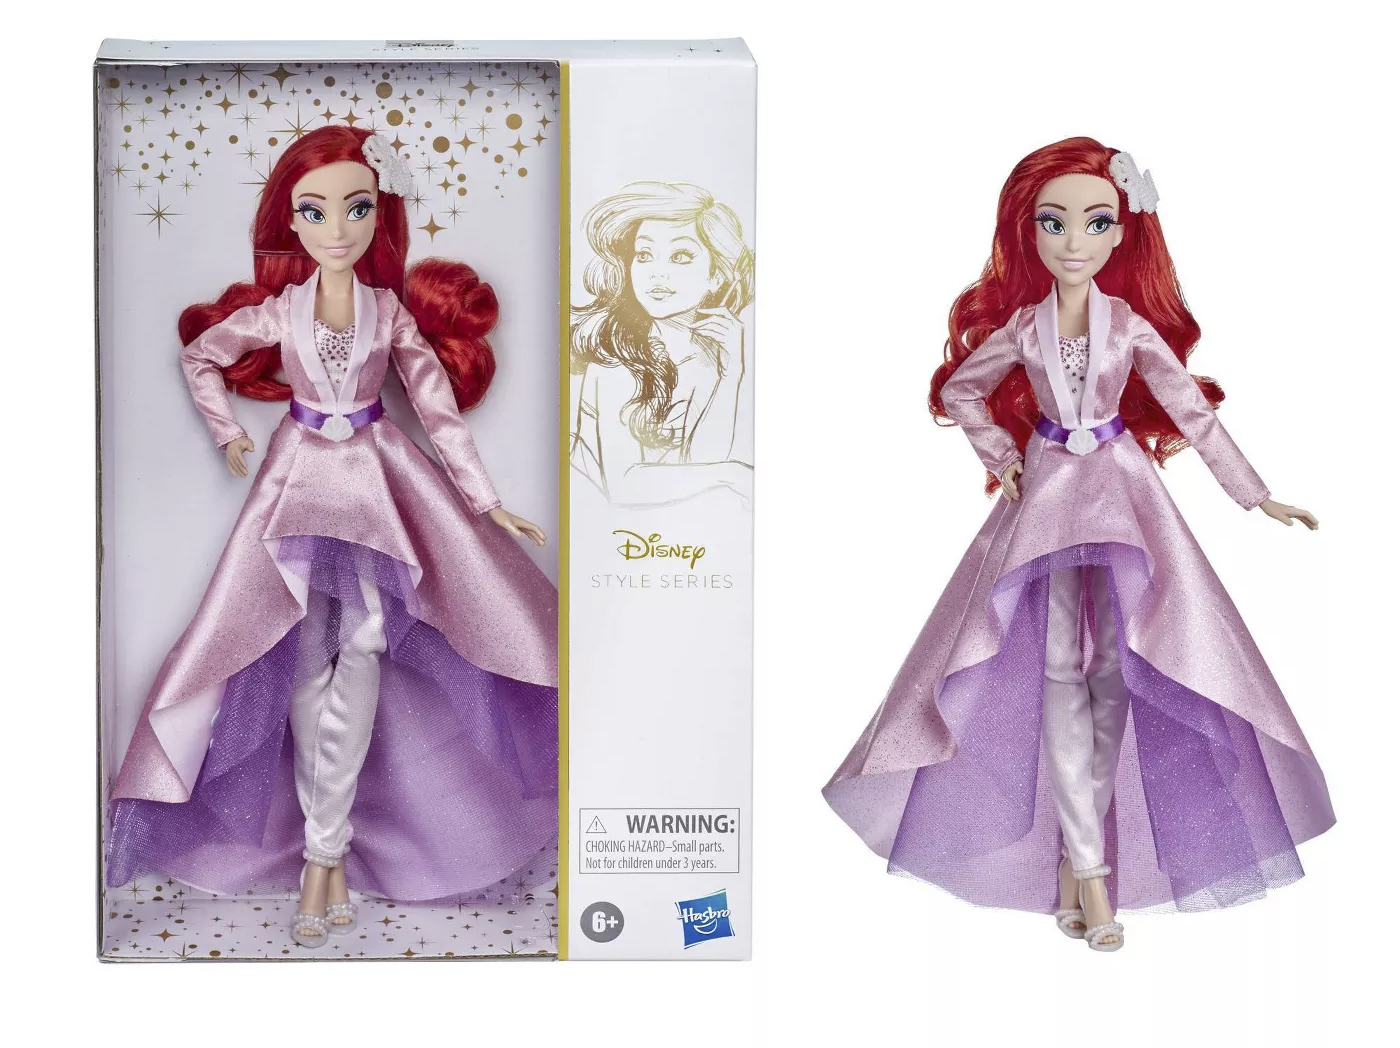 Disney Princess Style Series new Belle and Ariel dolls in